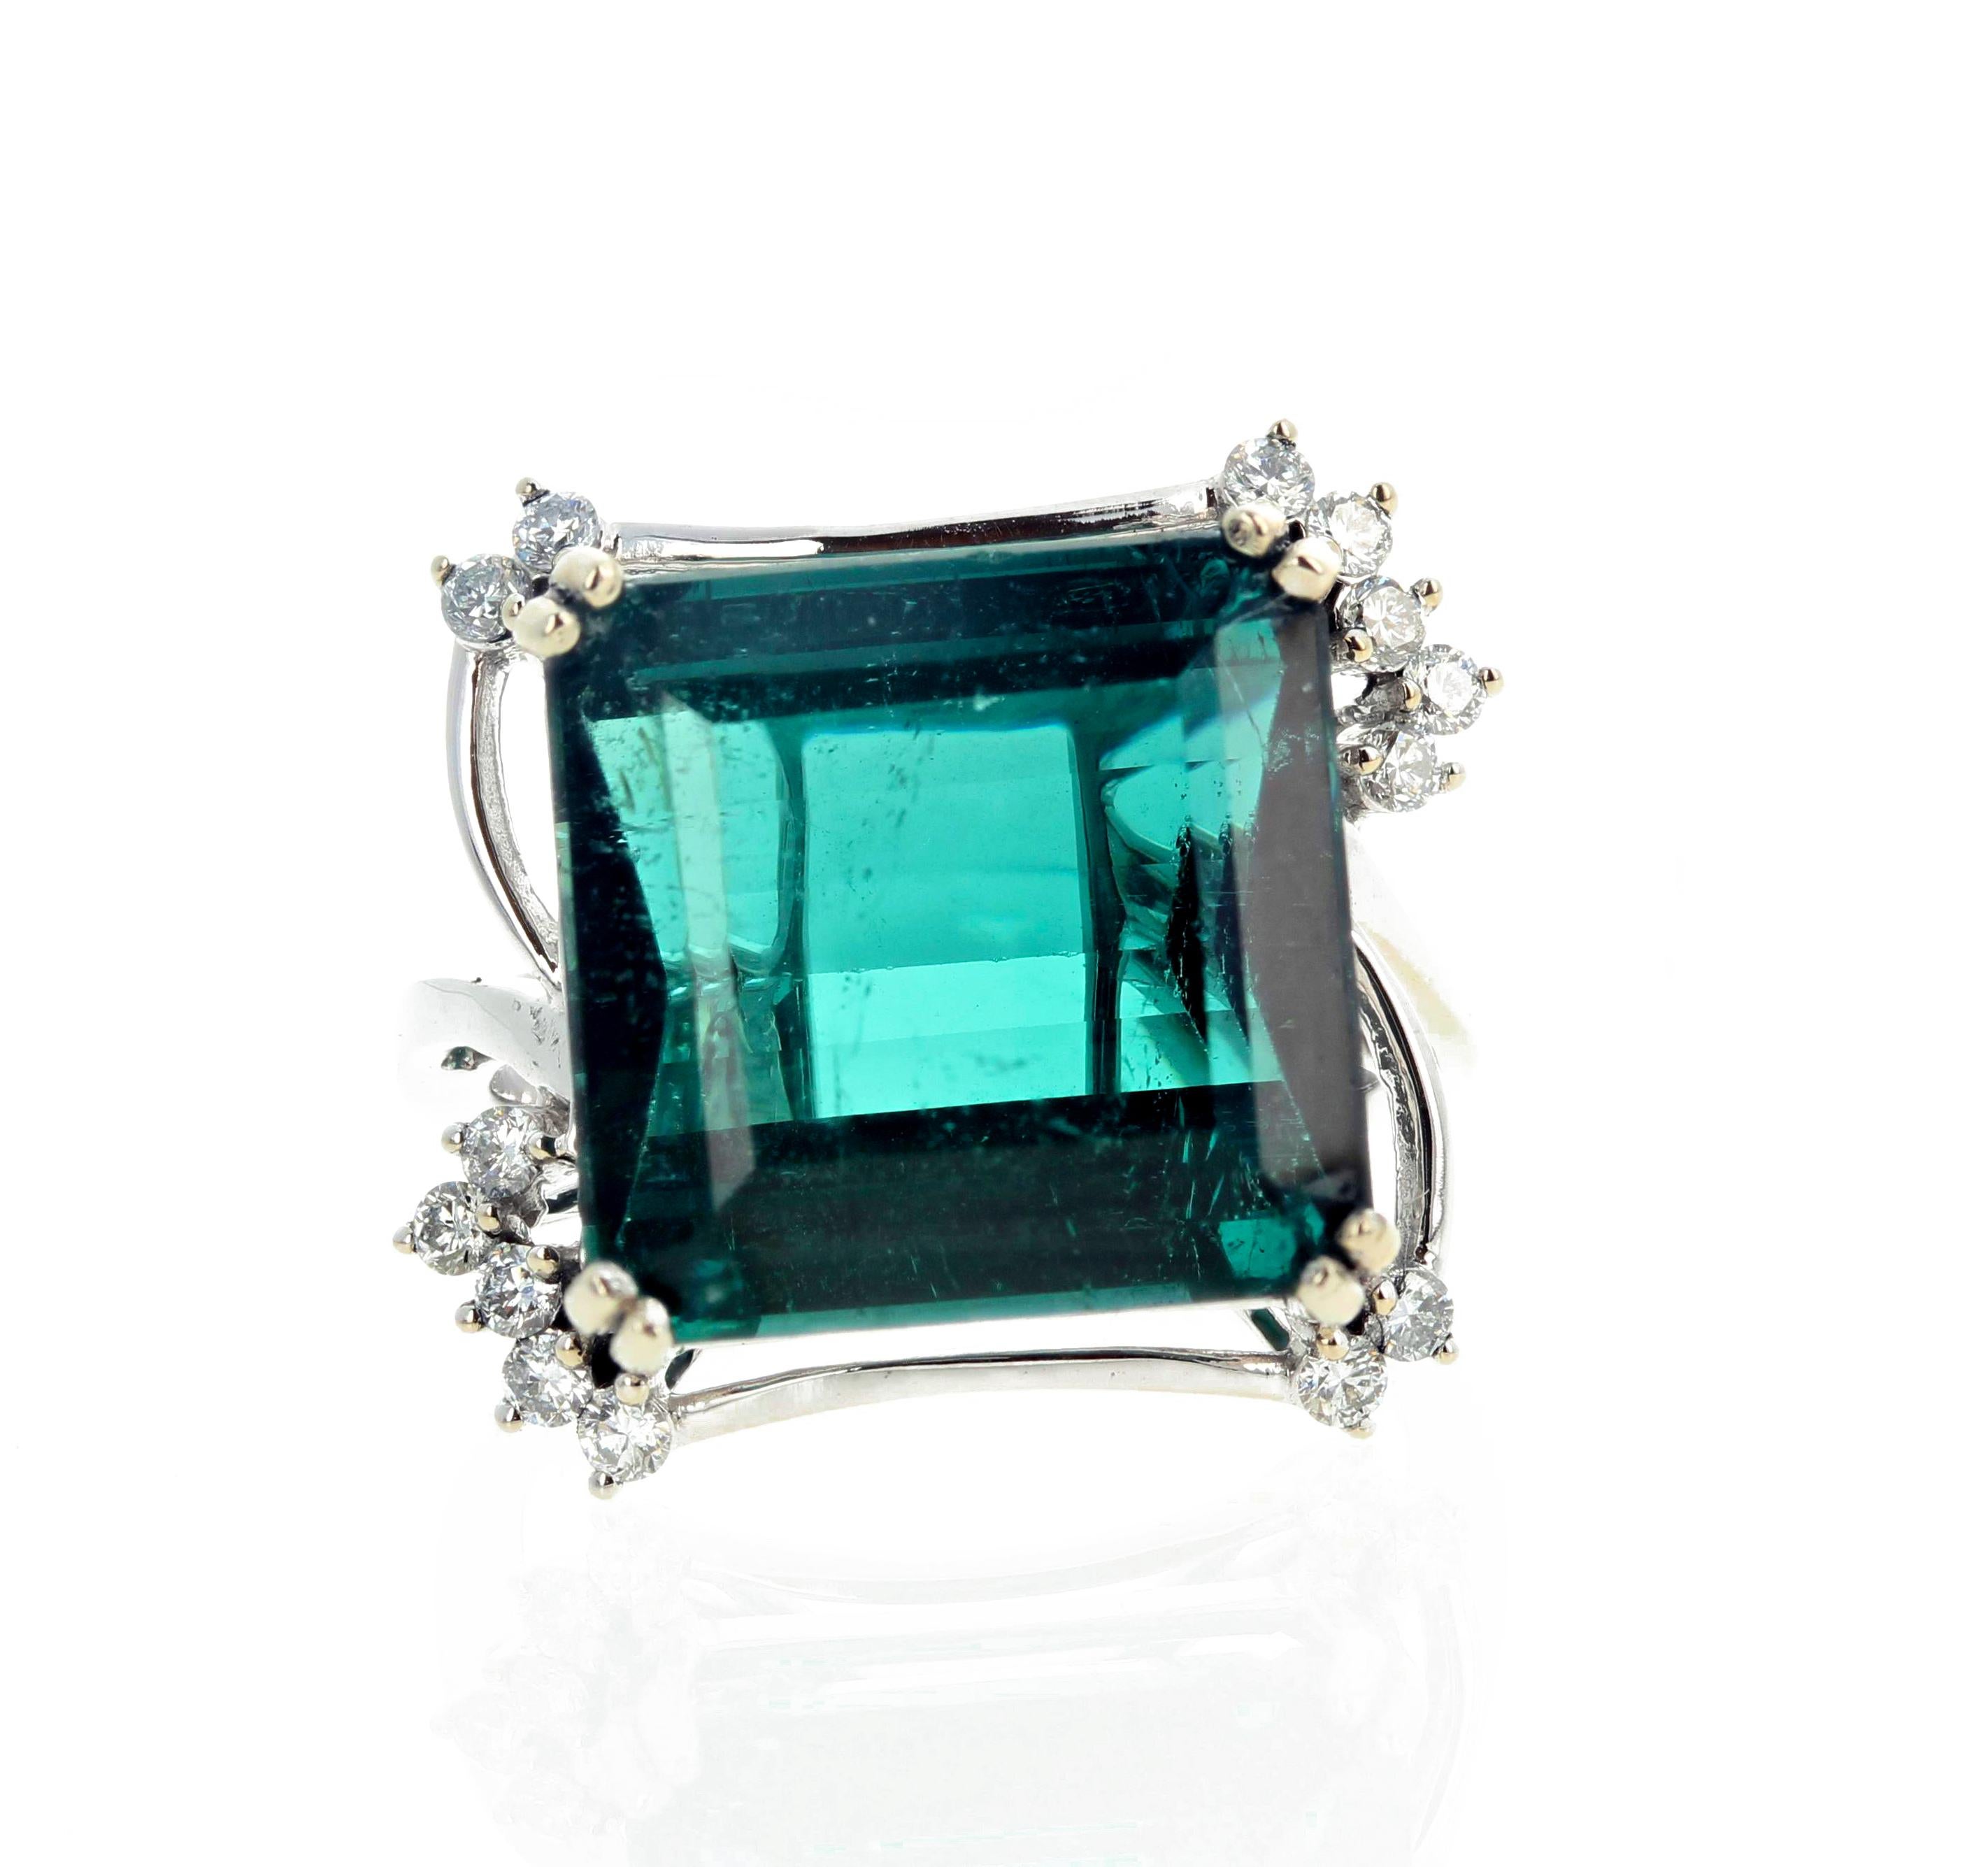 Gorgeous green-blue Natural Tourmaline (14. 7 mm x 14.4 mm) set in a white gold ring enhanced with .31 carats of sparkling white diamonds.  This Tourmaline and Diamond ring is size 7 (sizable). 